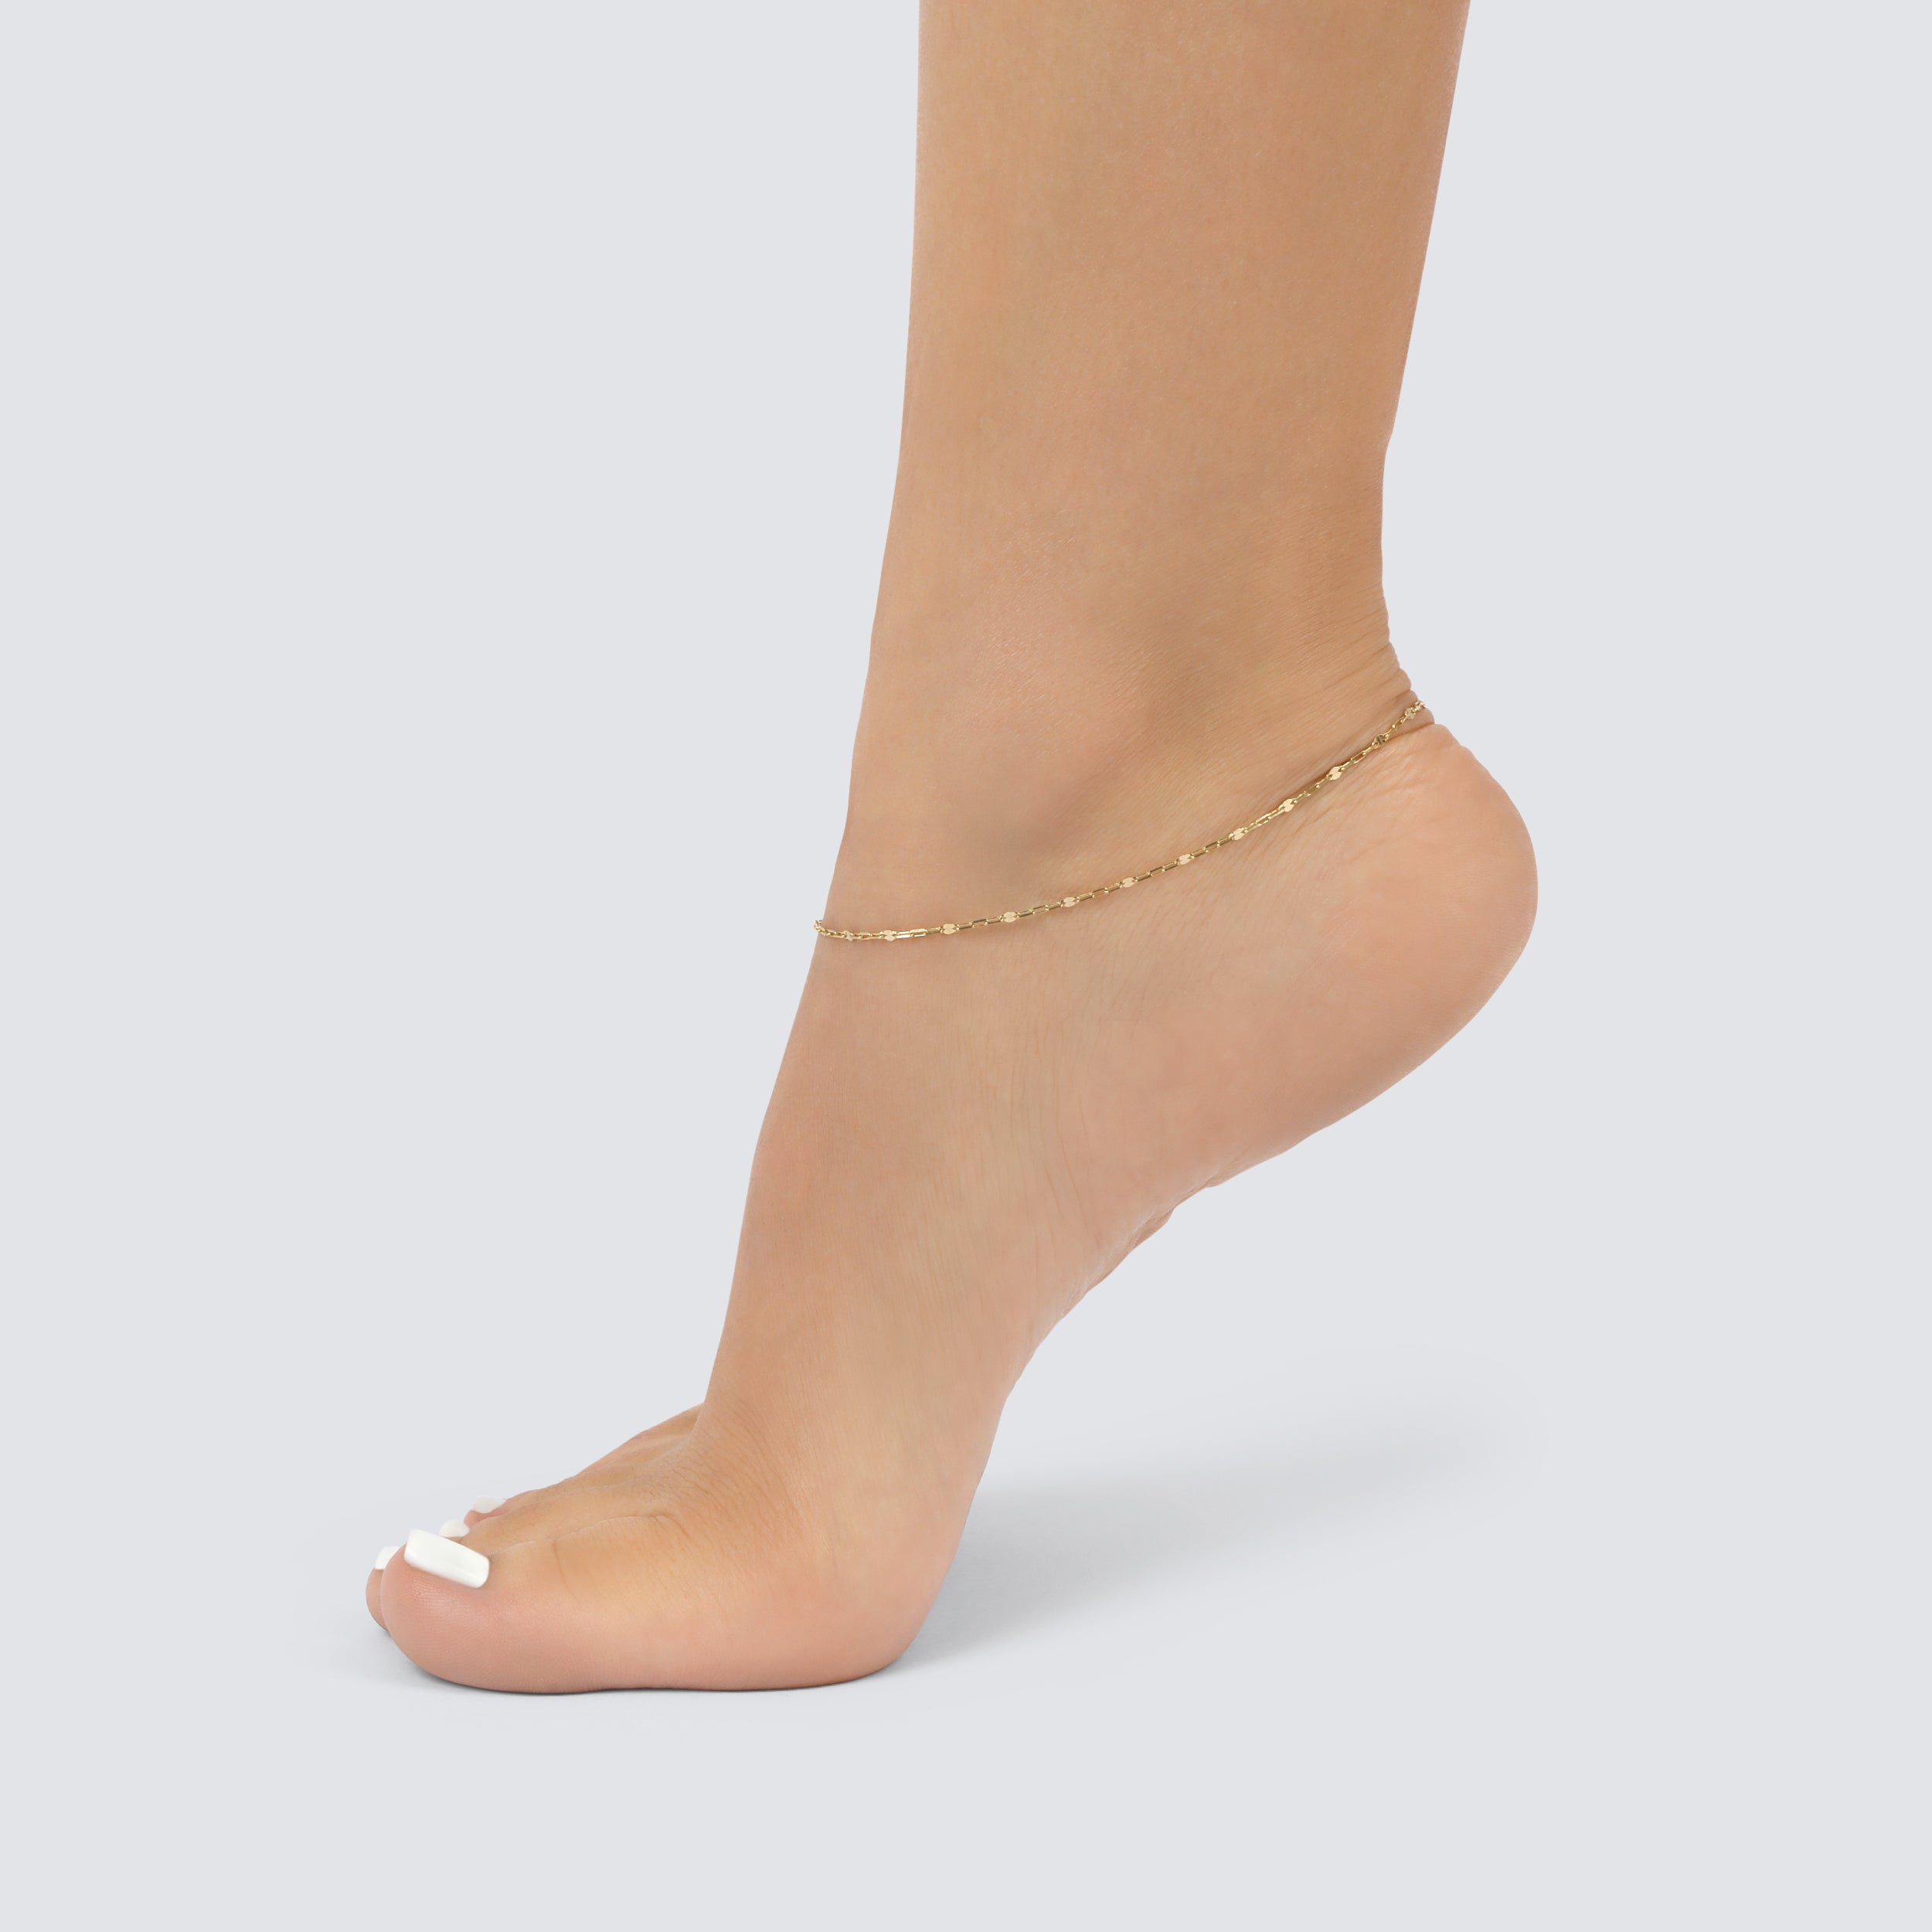 Trophy Wife Gold Dainty Anklet